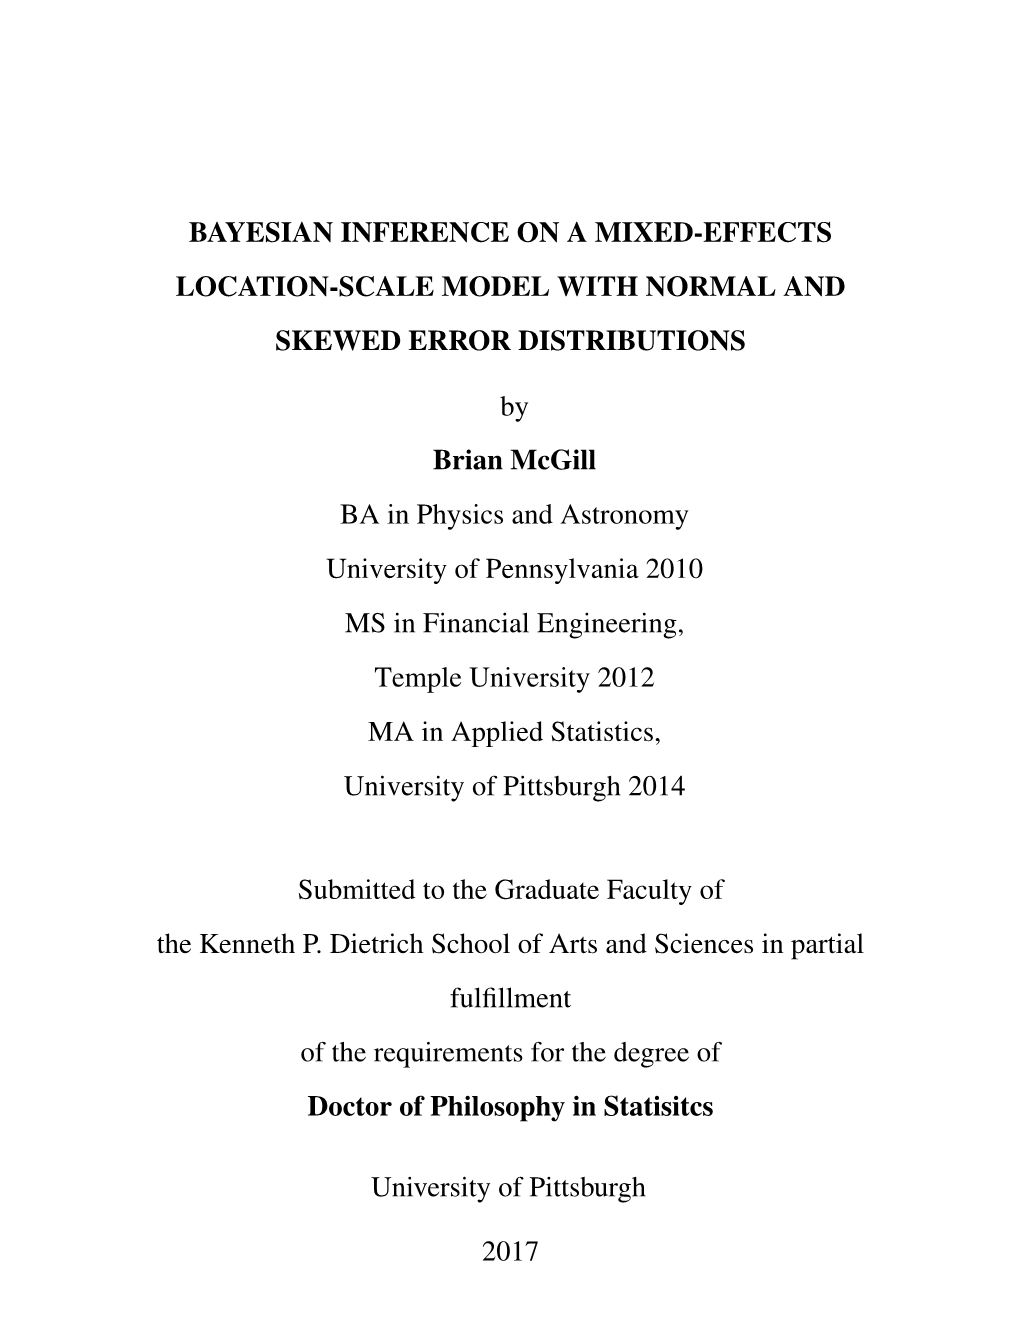 Bayesian Inference on a Mixed-Effects Location-Scale Model with Normal and Skewed Error Distributions